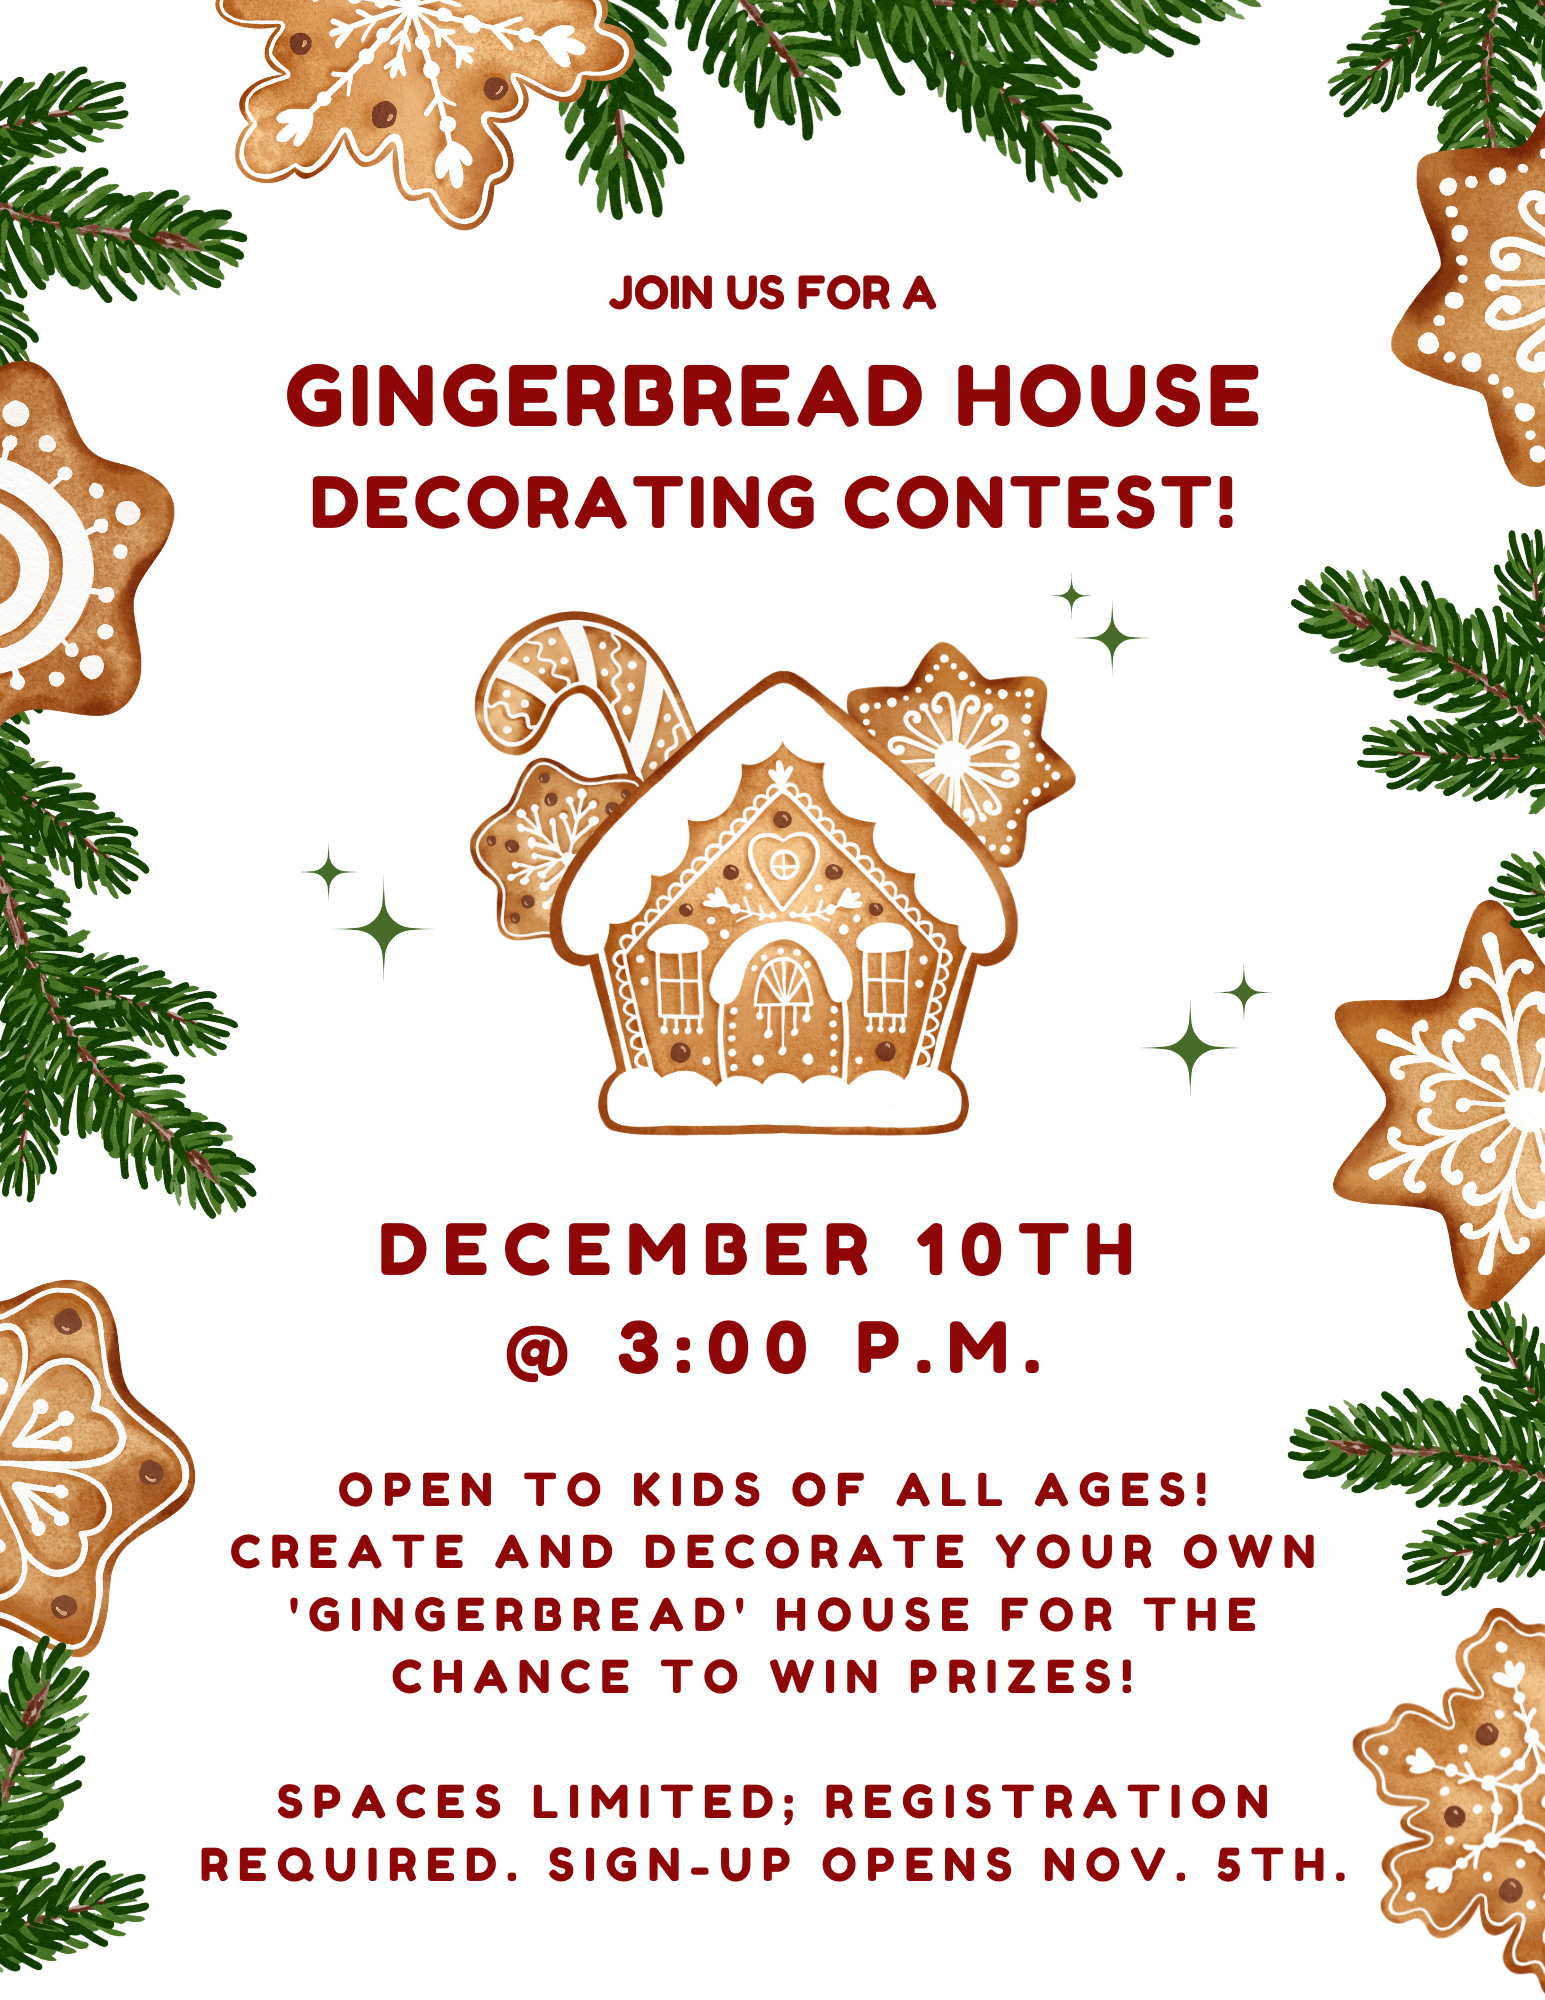 Join us on December 10th at 3pm to have some holiday fun and have the chance to win prizes! Open to kids of all ages.